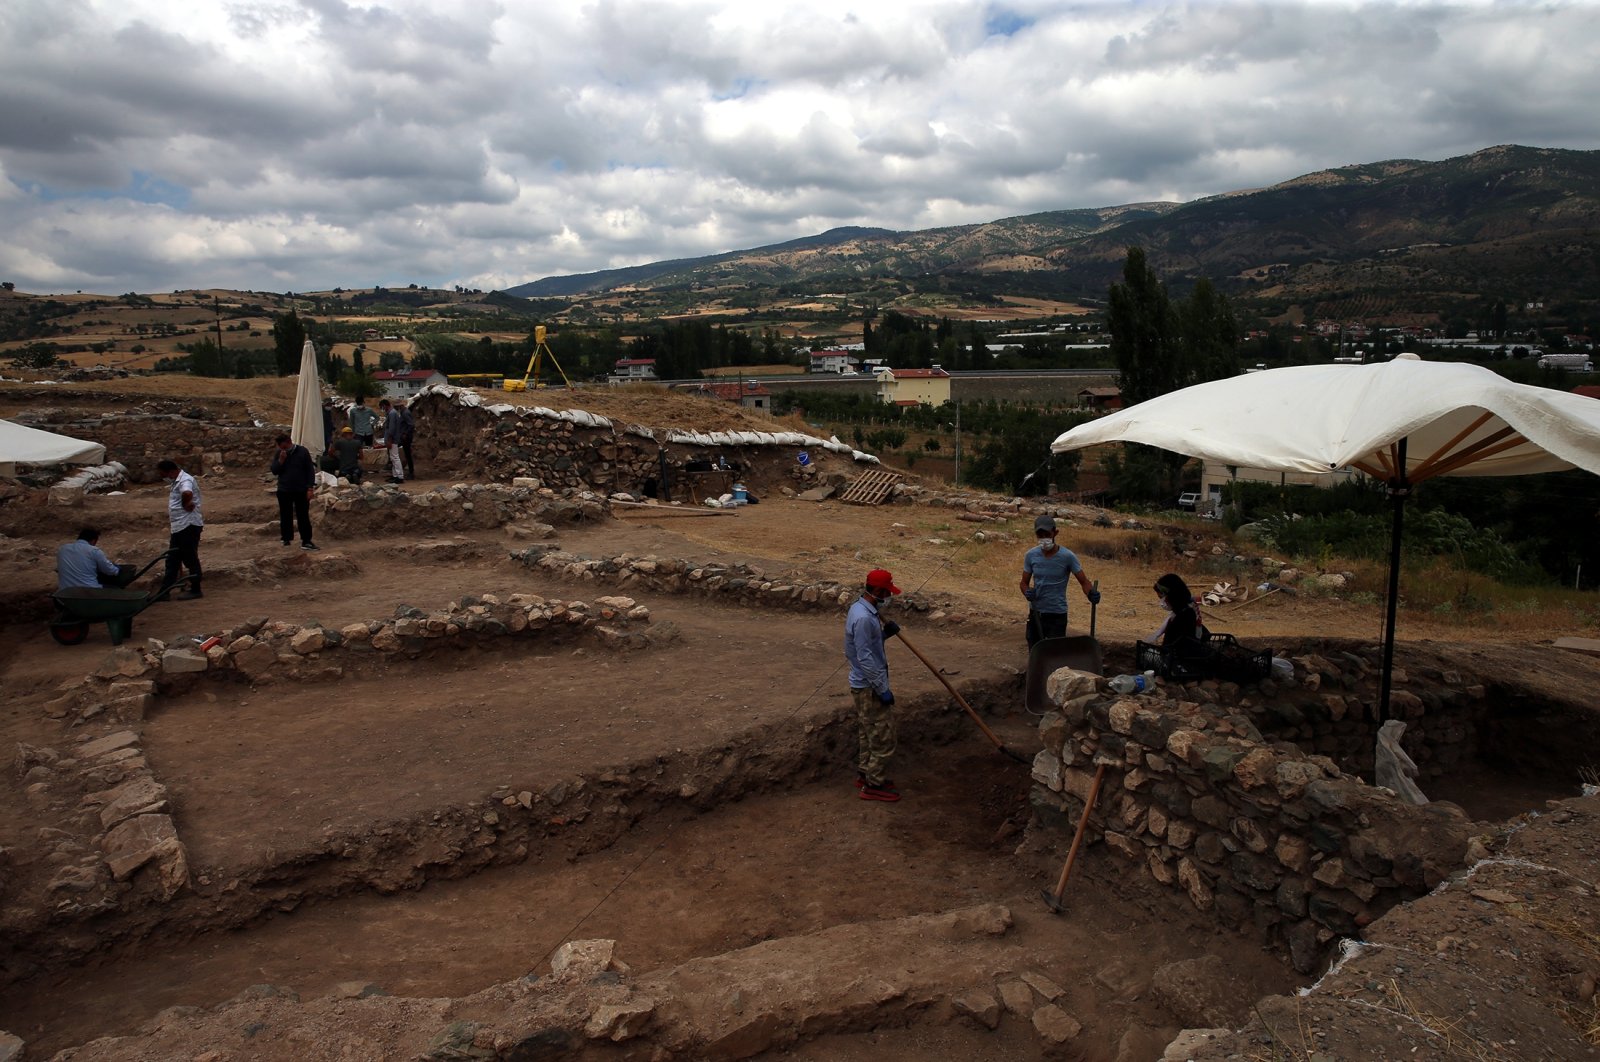 An archaeological team works on the historical remains of the ancient city of Comana Pontica, in Tokat, Turkey, Aug. 2, 2021. (AA Photo)